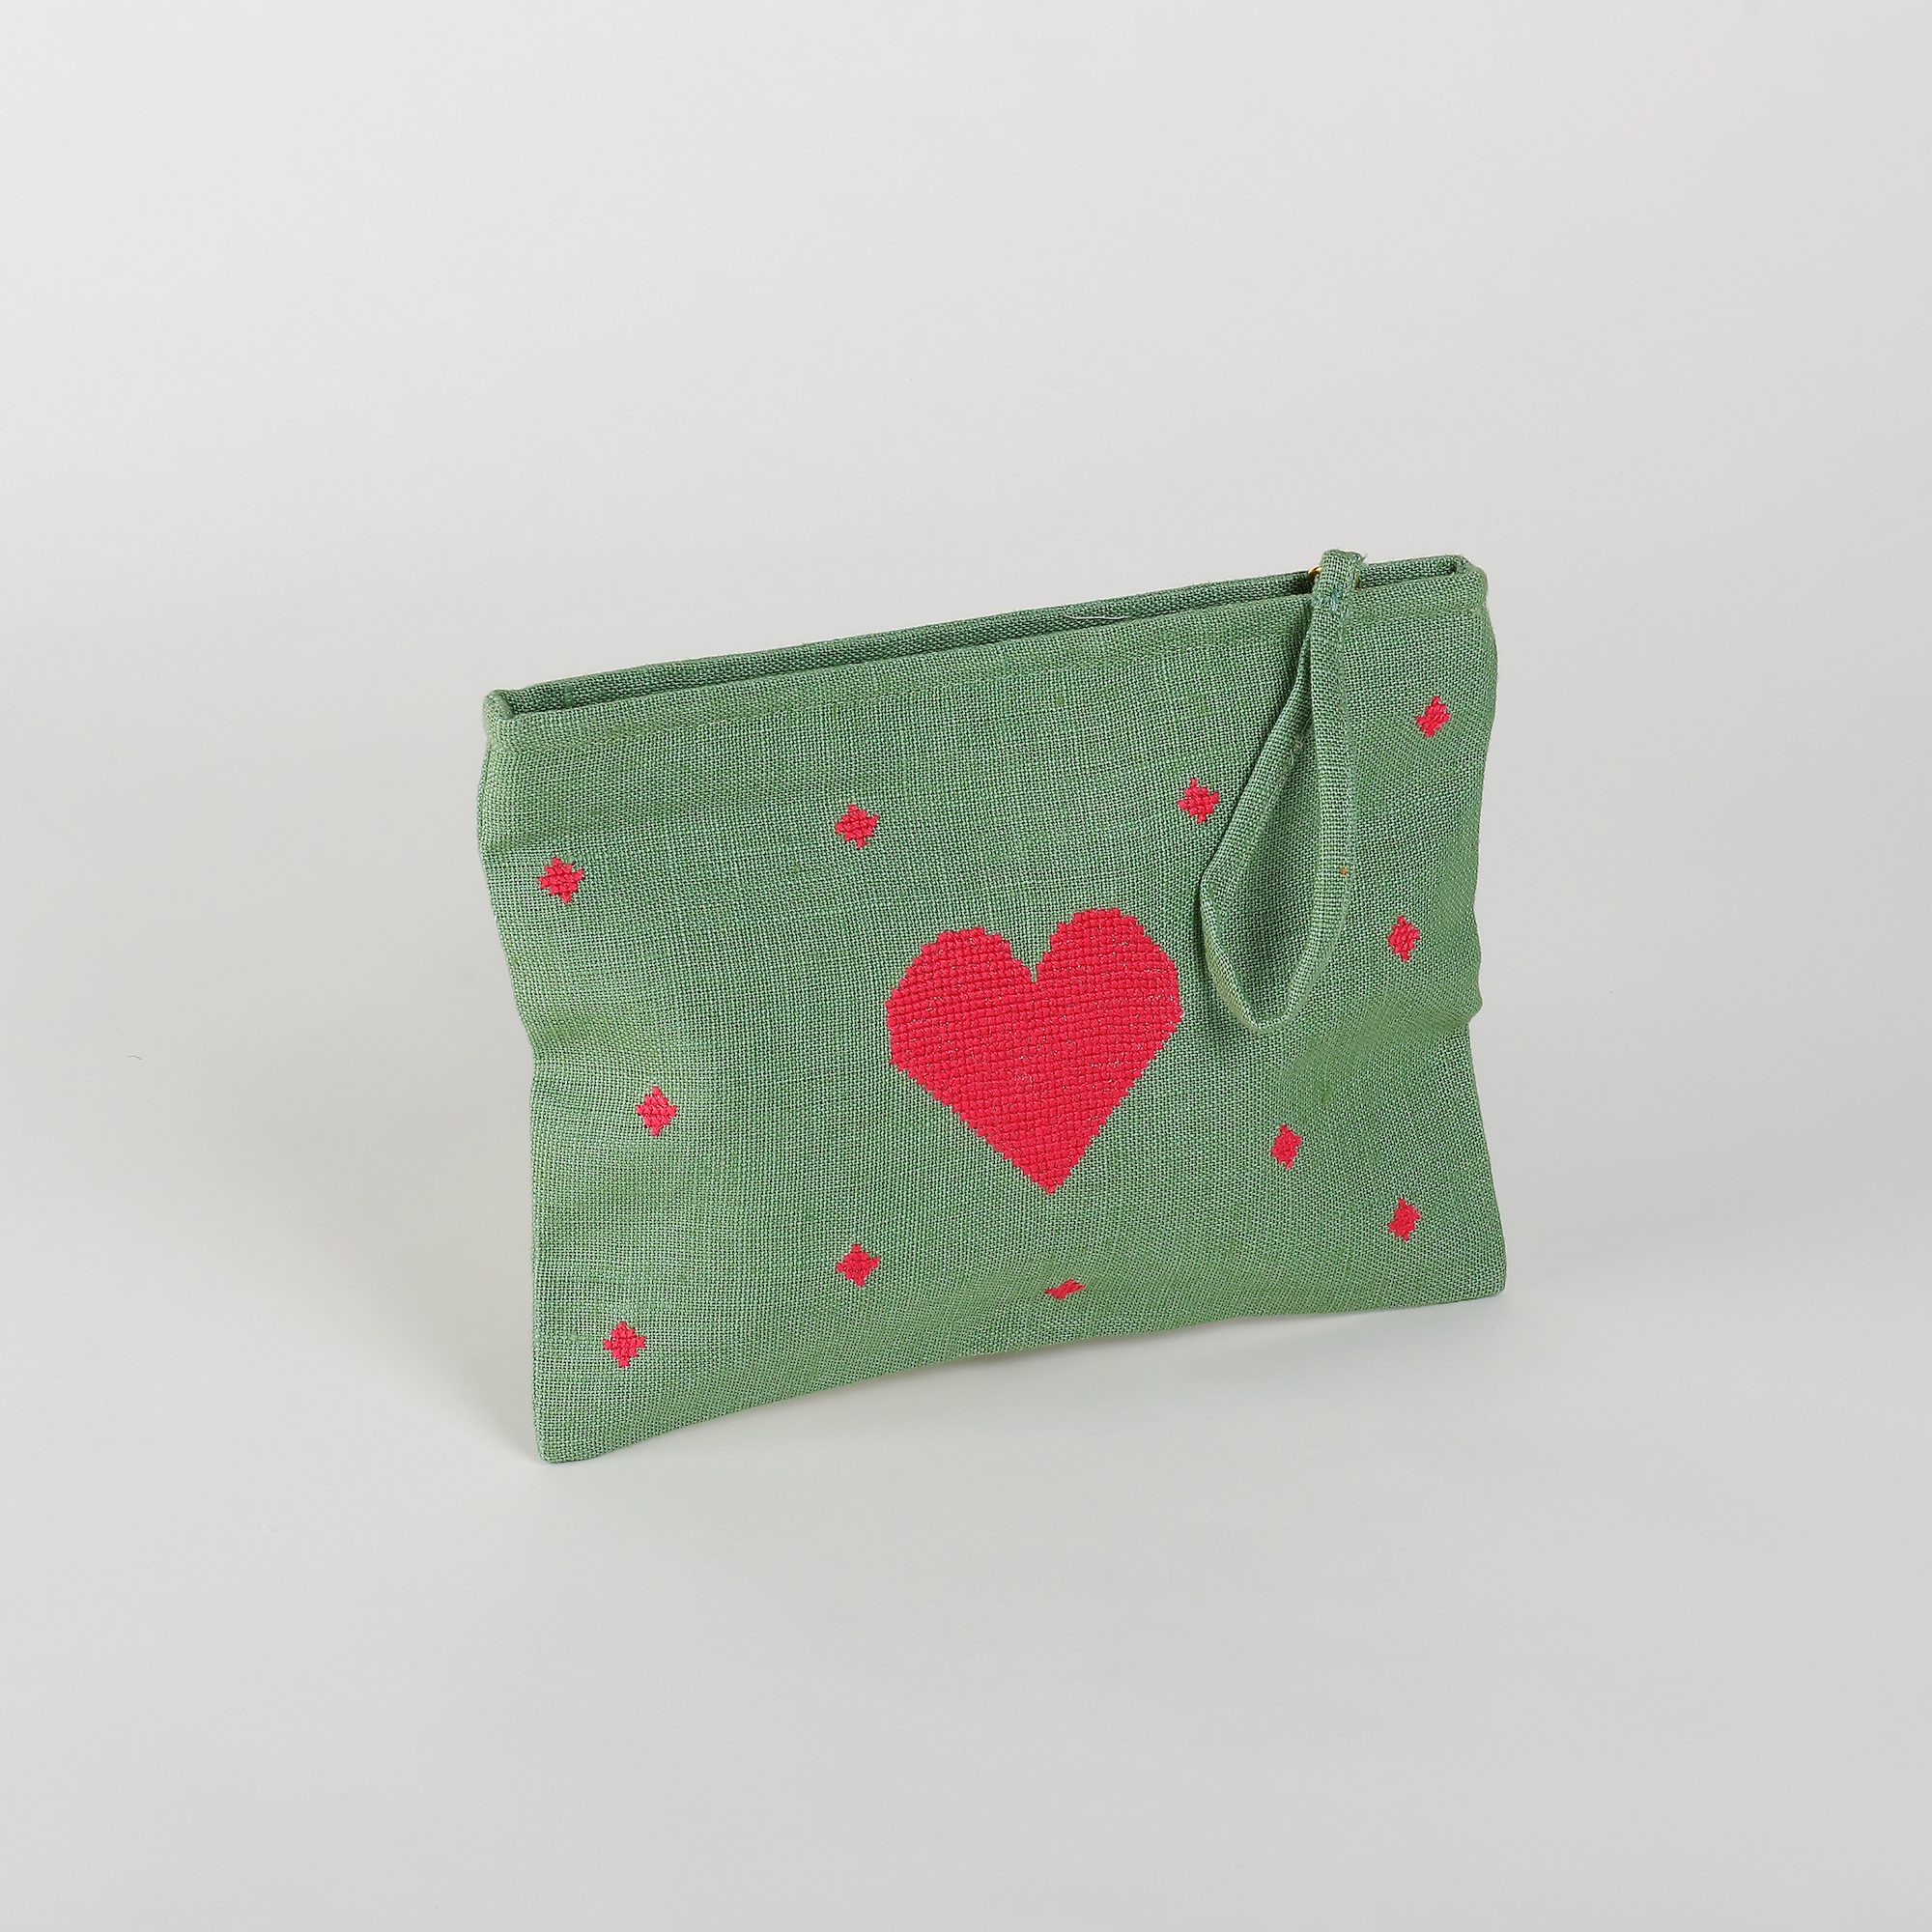 Threads of Hope - Heart Pouch